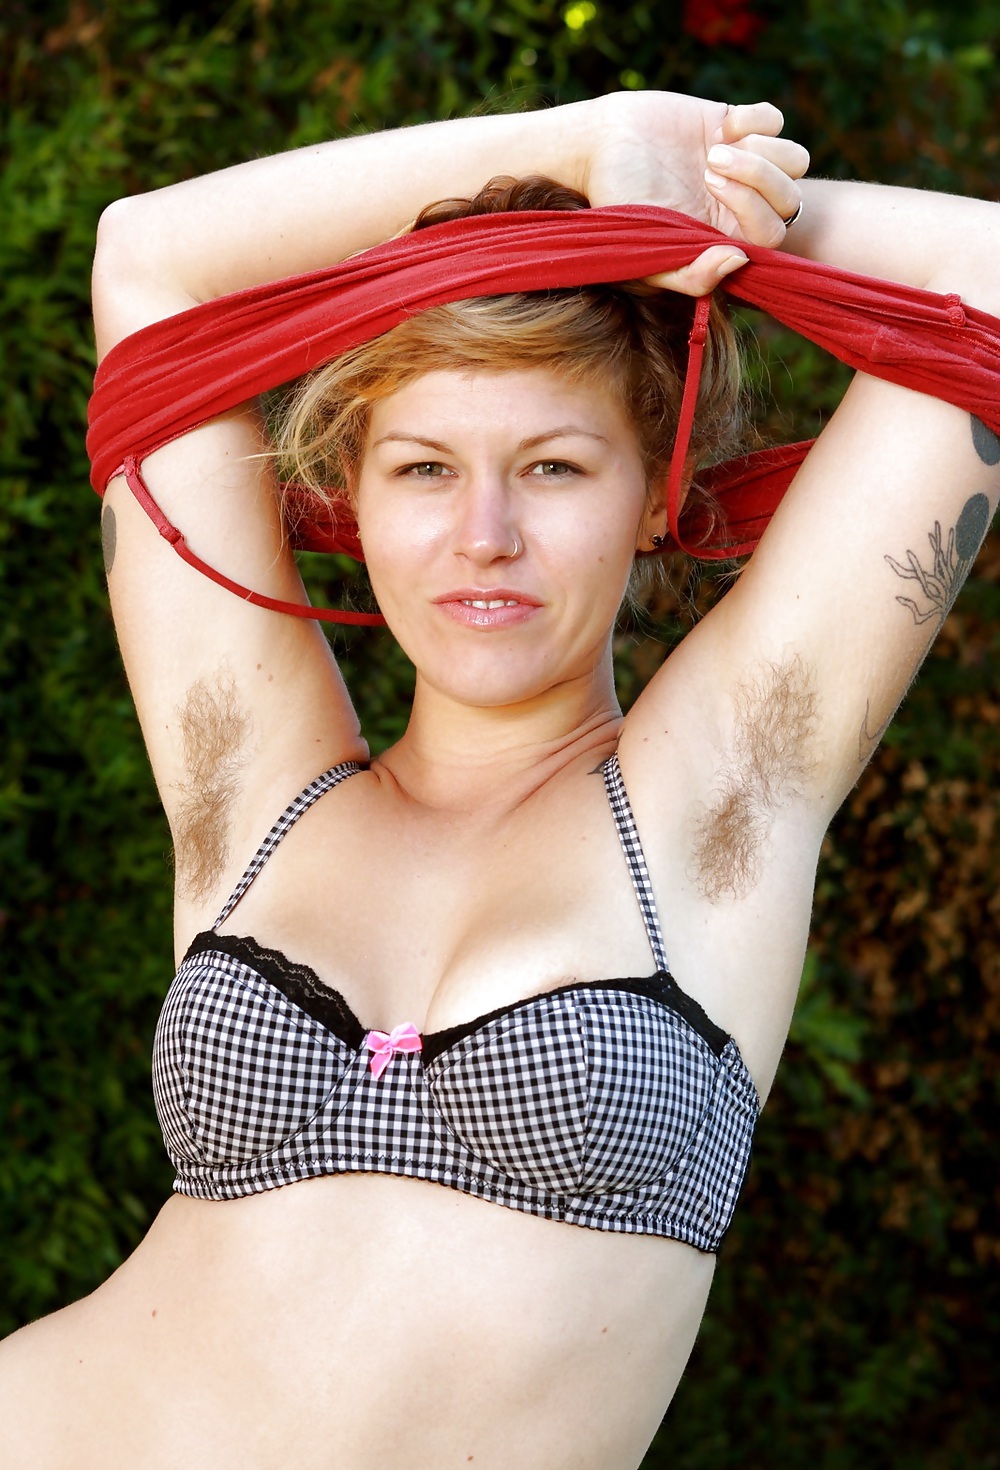 Miscellaneous girls showing hairy, unshaven armpits 2 #36246605